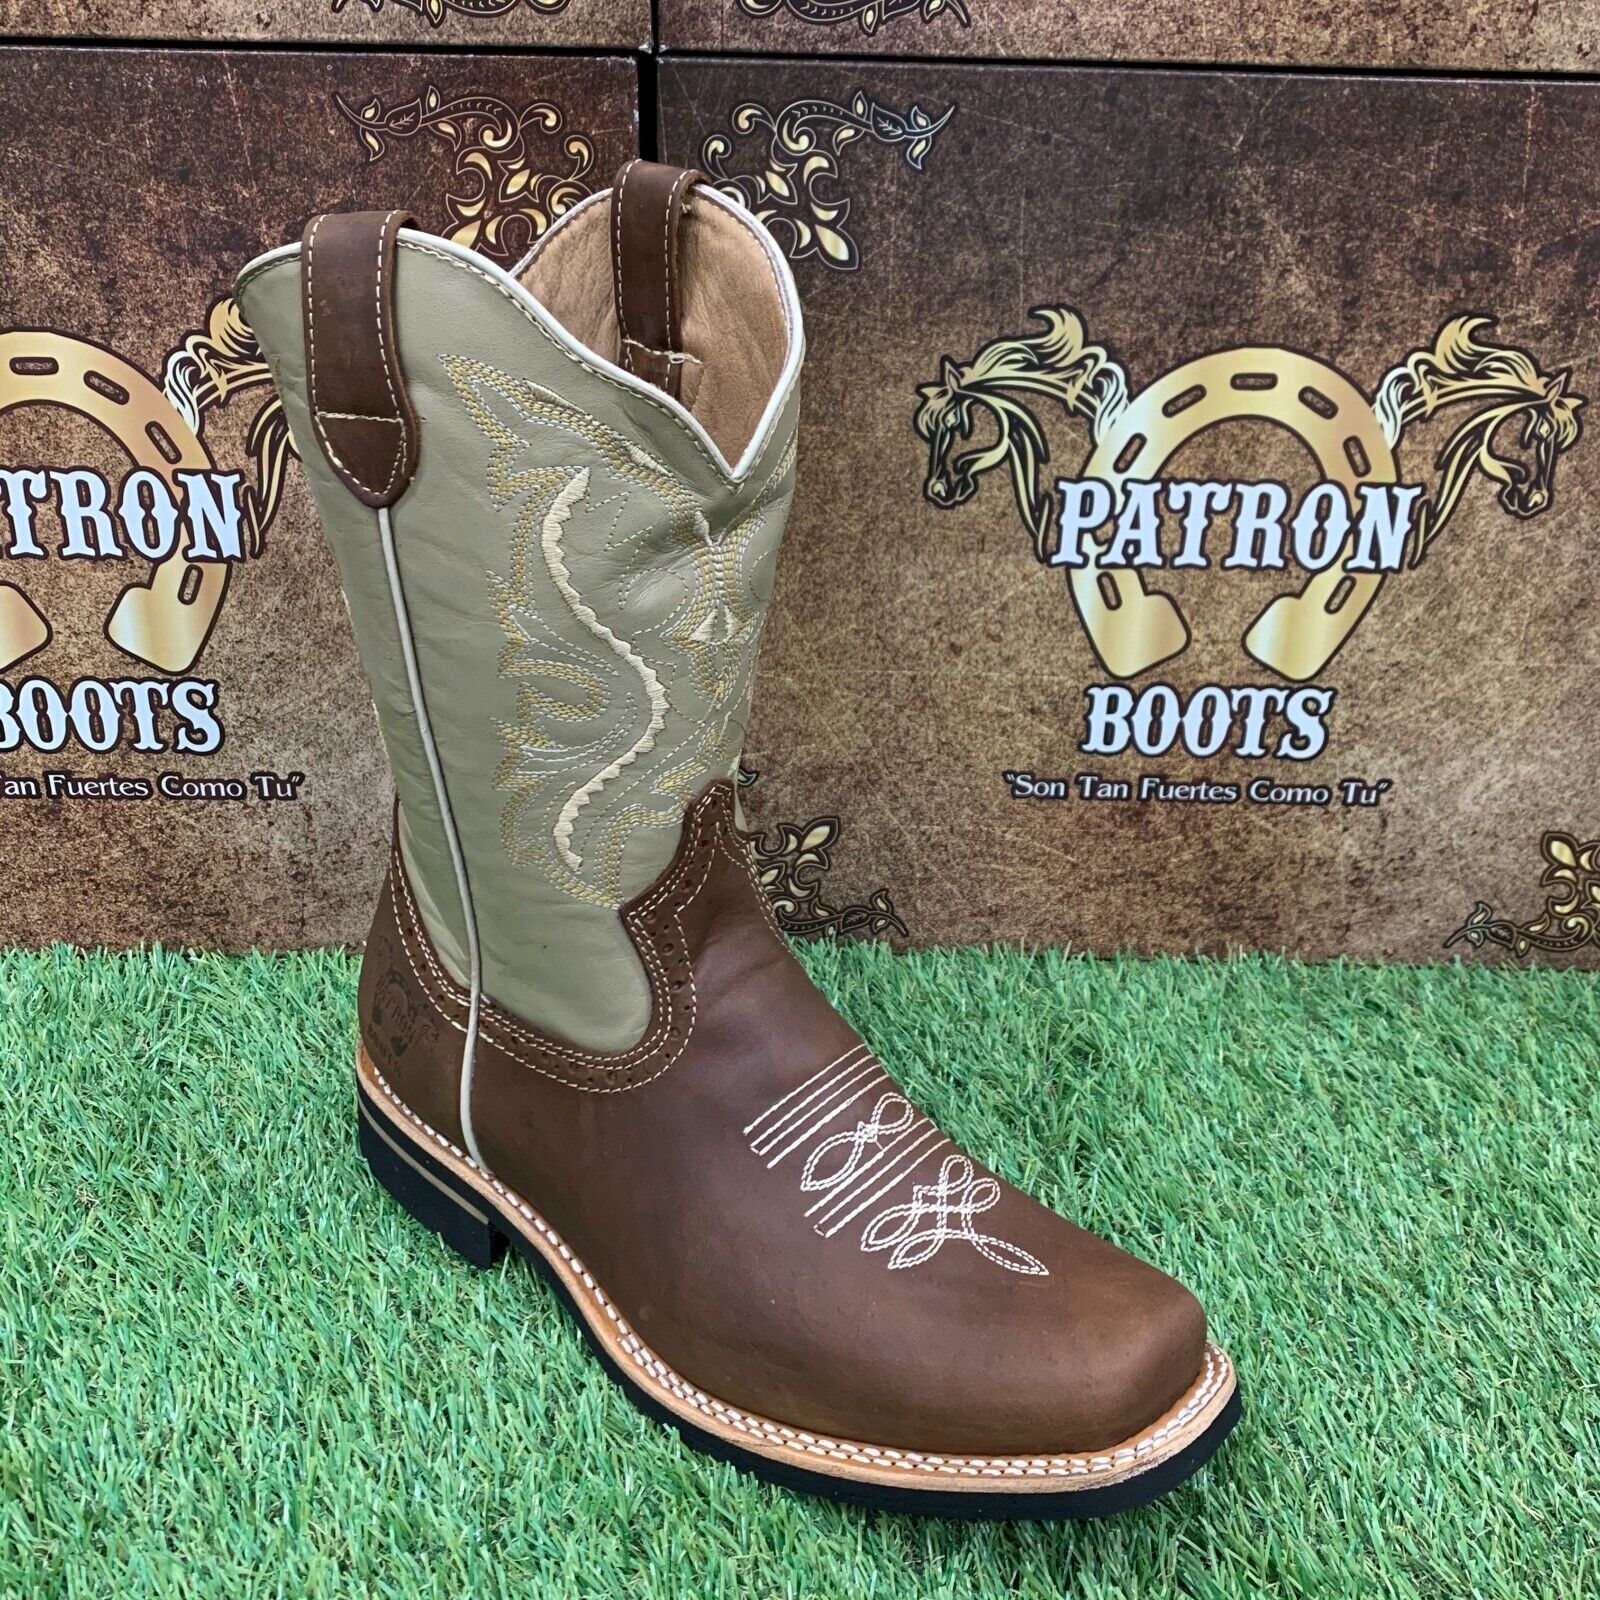 MENS RODEO COWBOY BOOTS TAN LEATHER WESTERN TYPE FOR WORK BOTAS DE TRABAJO